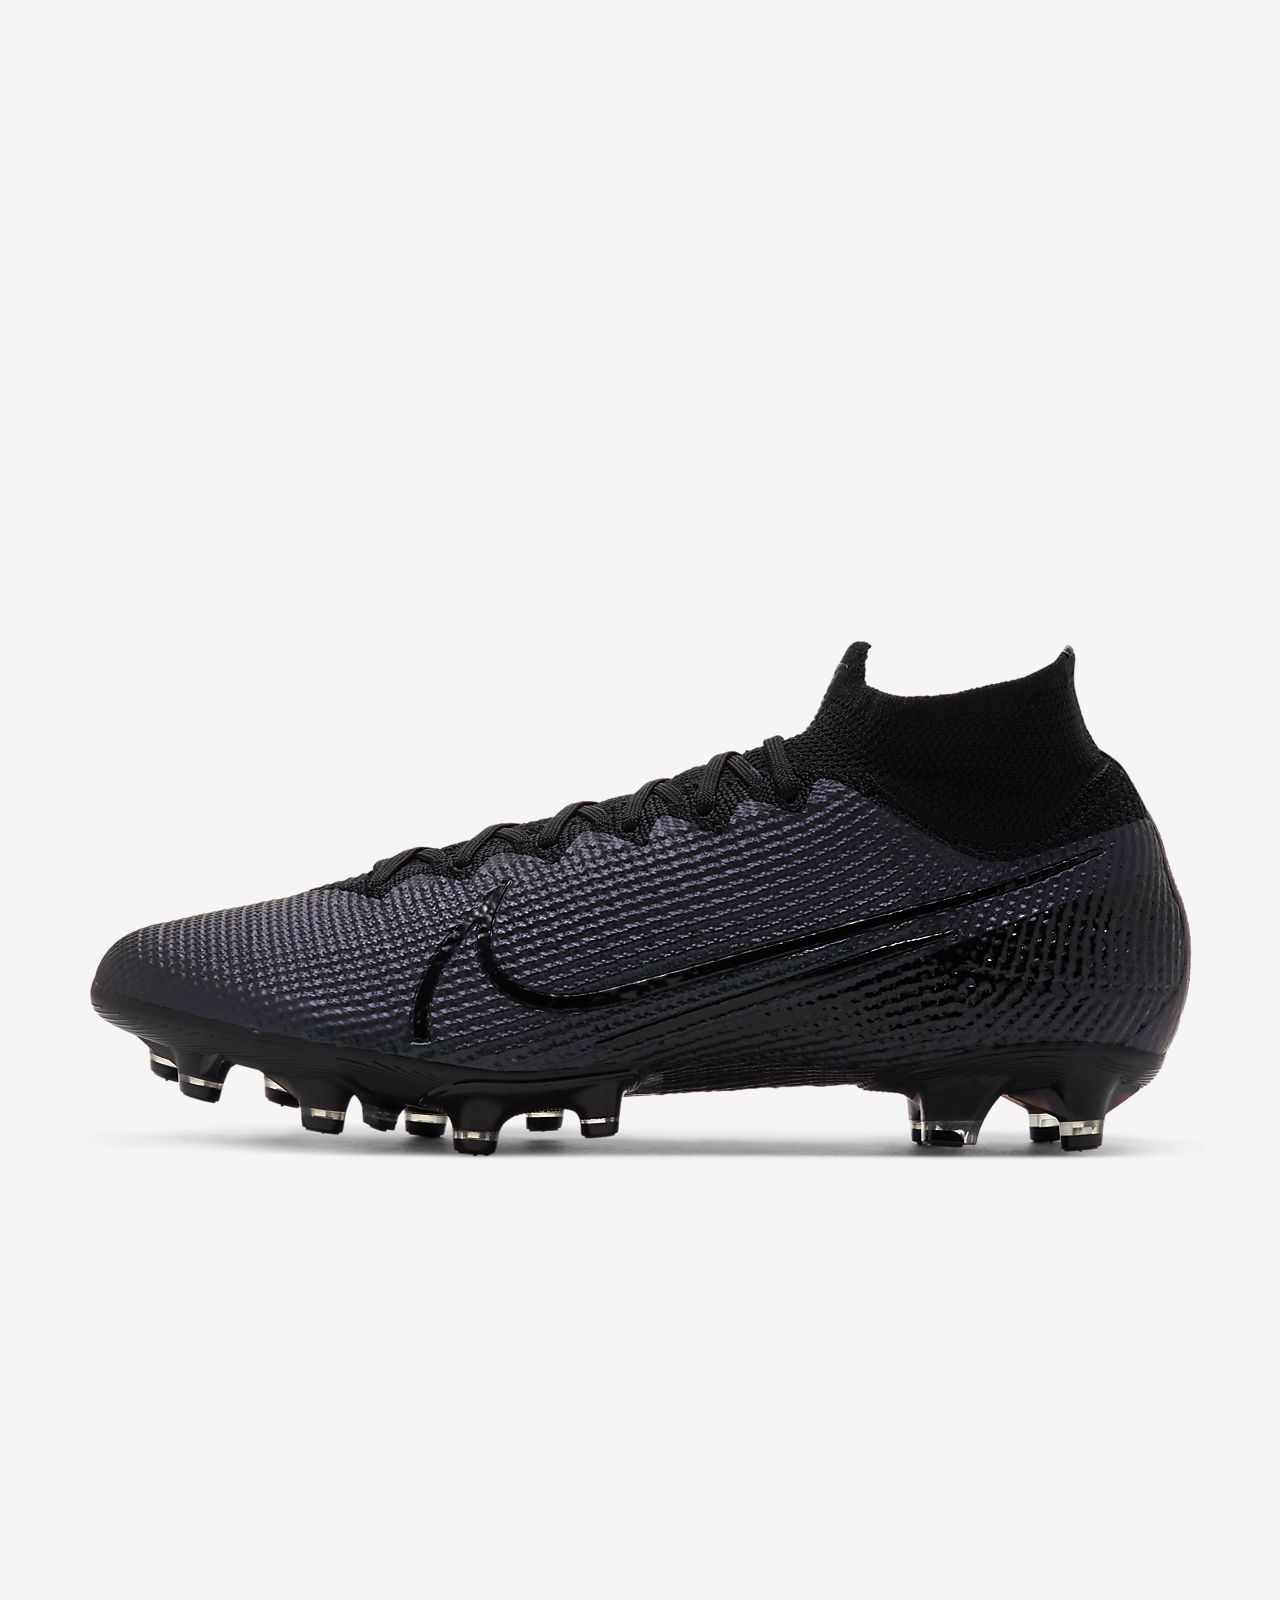 Nike Mercurial Superfly 6 Pro FG Soccer Cleat. Amazon.in